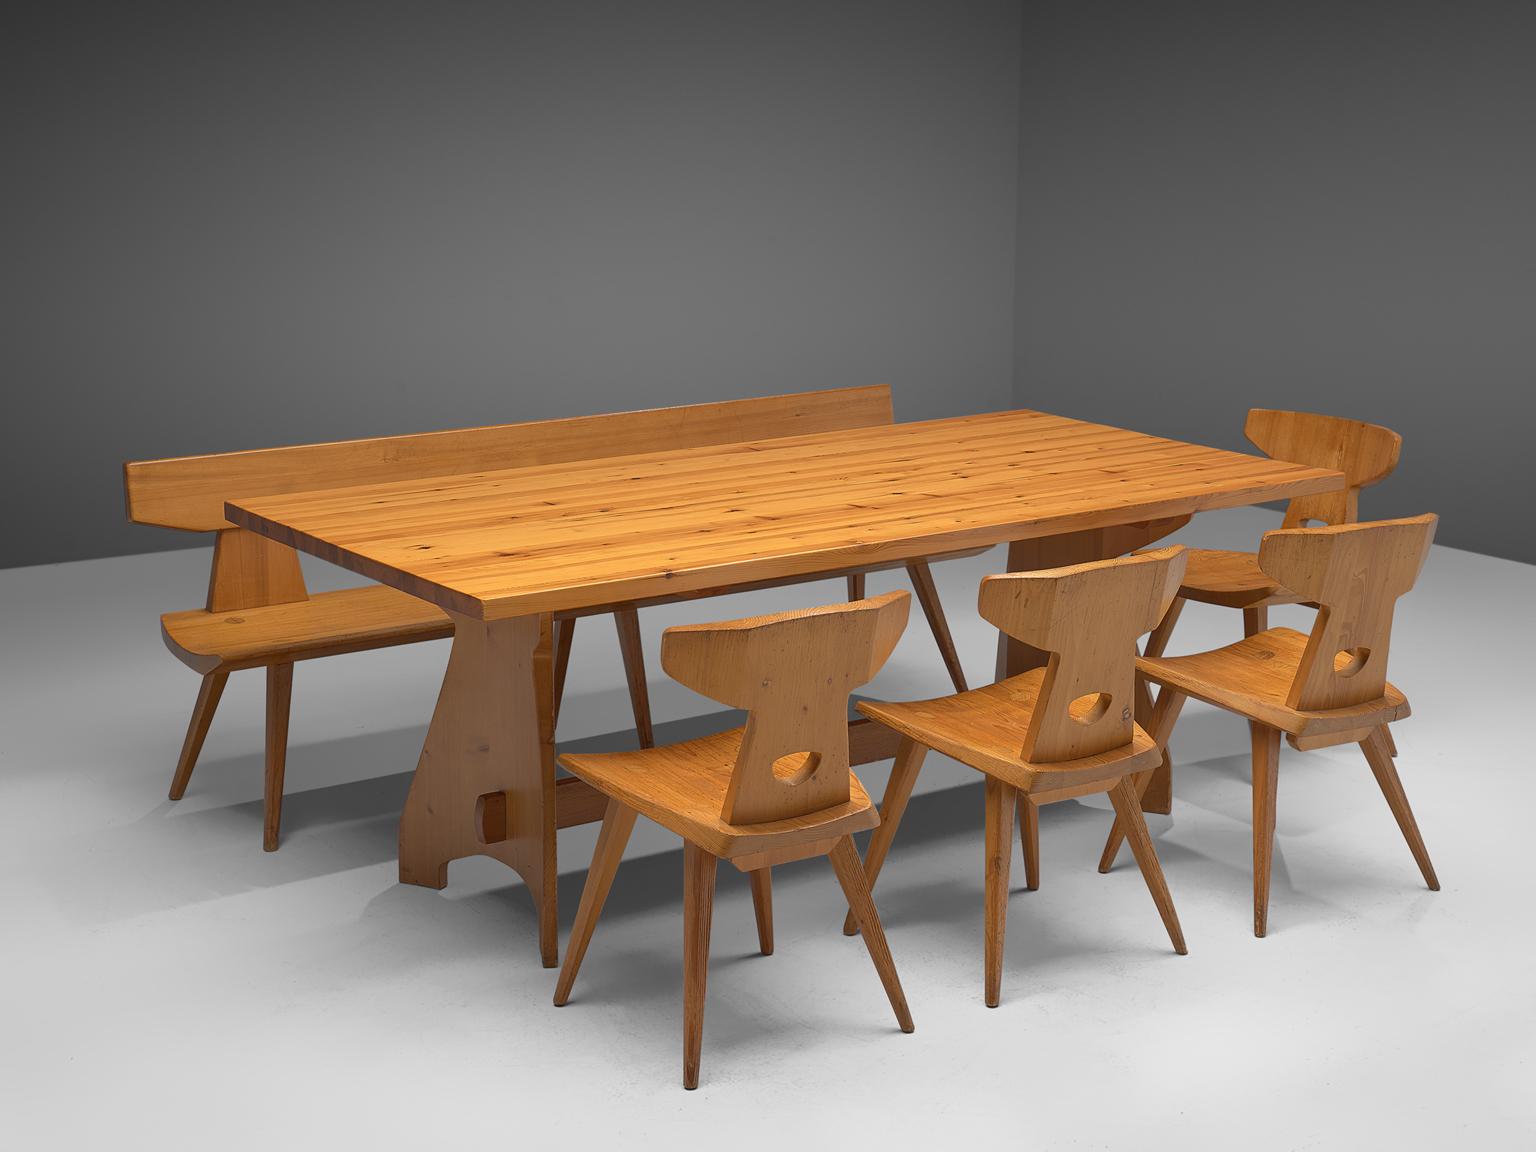 Mid-20th Century Jacob Kielland-Brandt Dining Table in Solid Pine